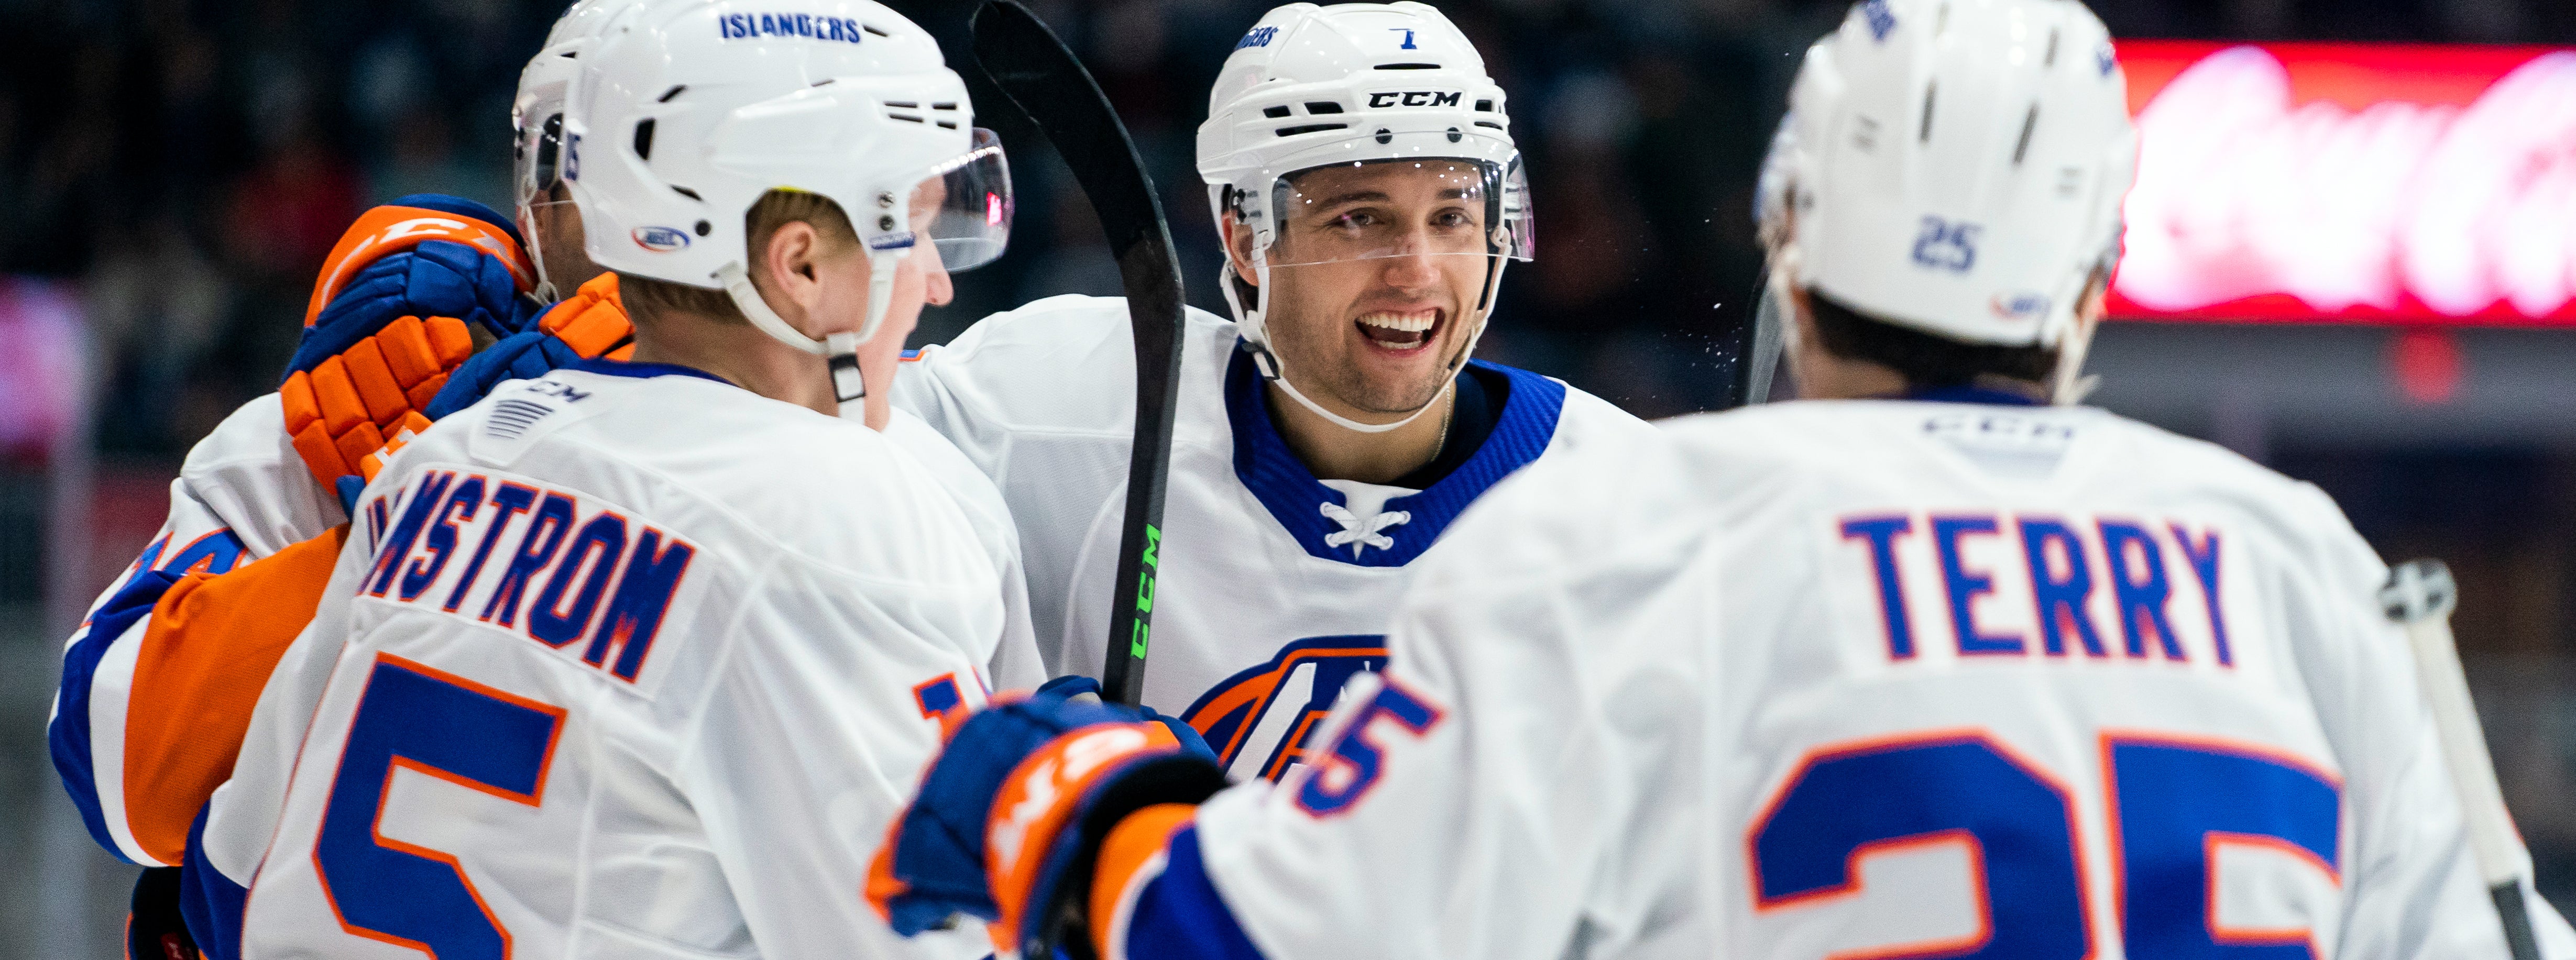 Islanders One-Timers: House of Highlights, Durandeau's Debut - New